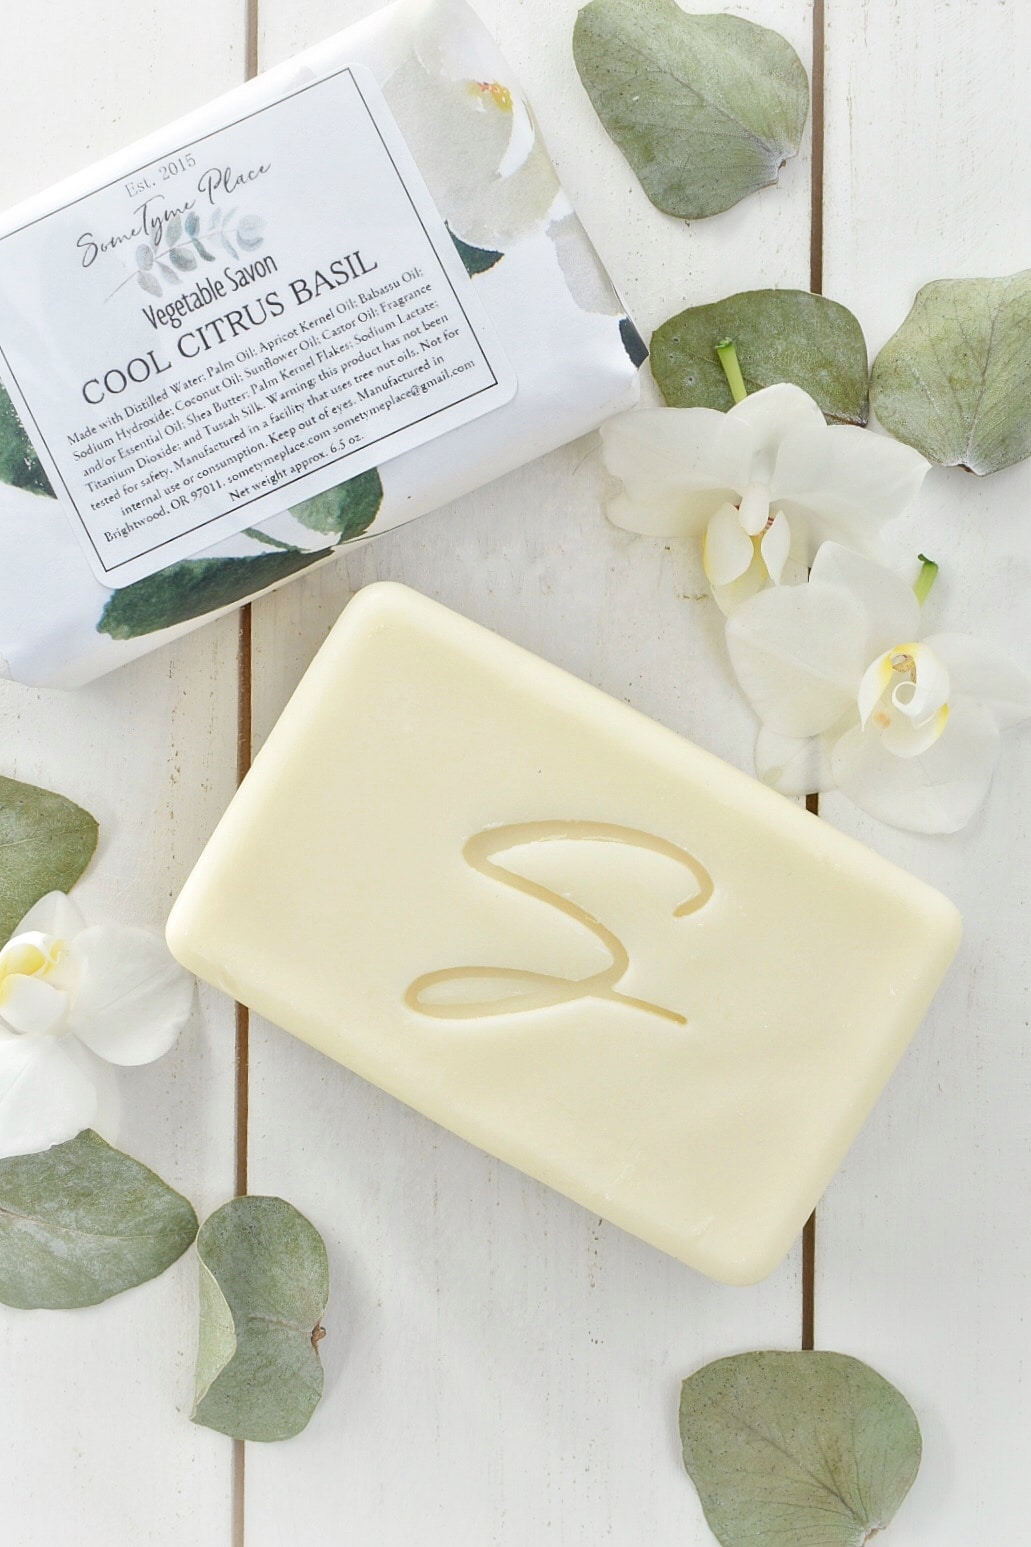 Cool Citrus Basil Soap ⋆ SomeTyme Place ⋆ SomeTyme Place